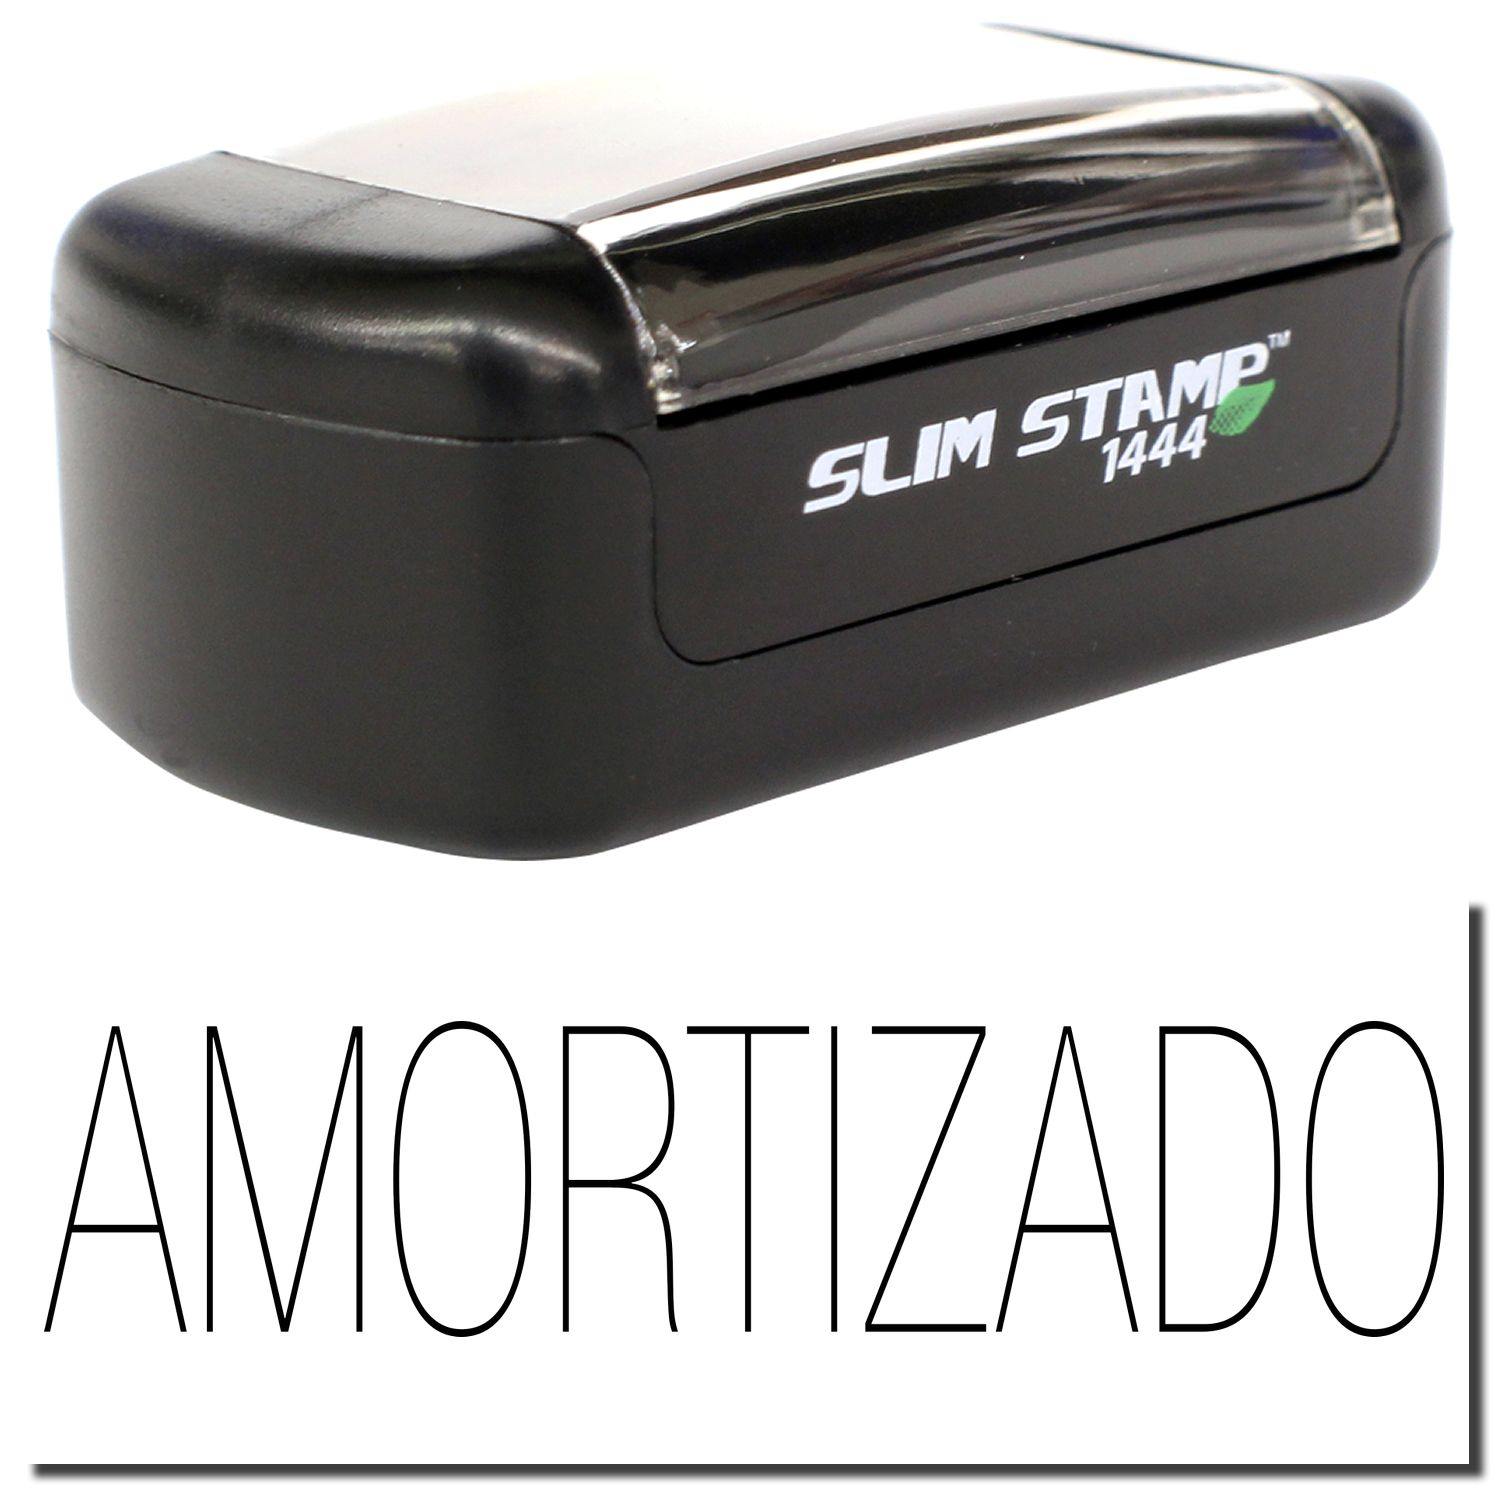 A stock office pre-inked stamp with a stamped image showing how the text "AMORTIZADO" is displayed after stamping.